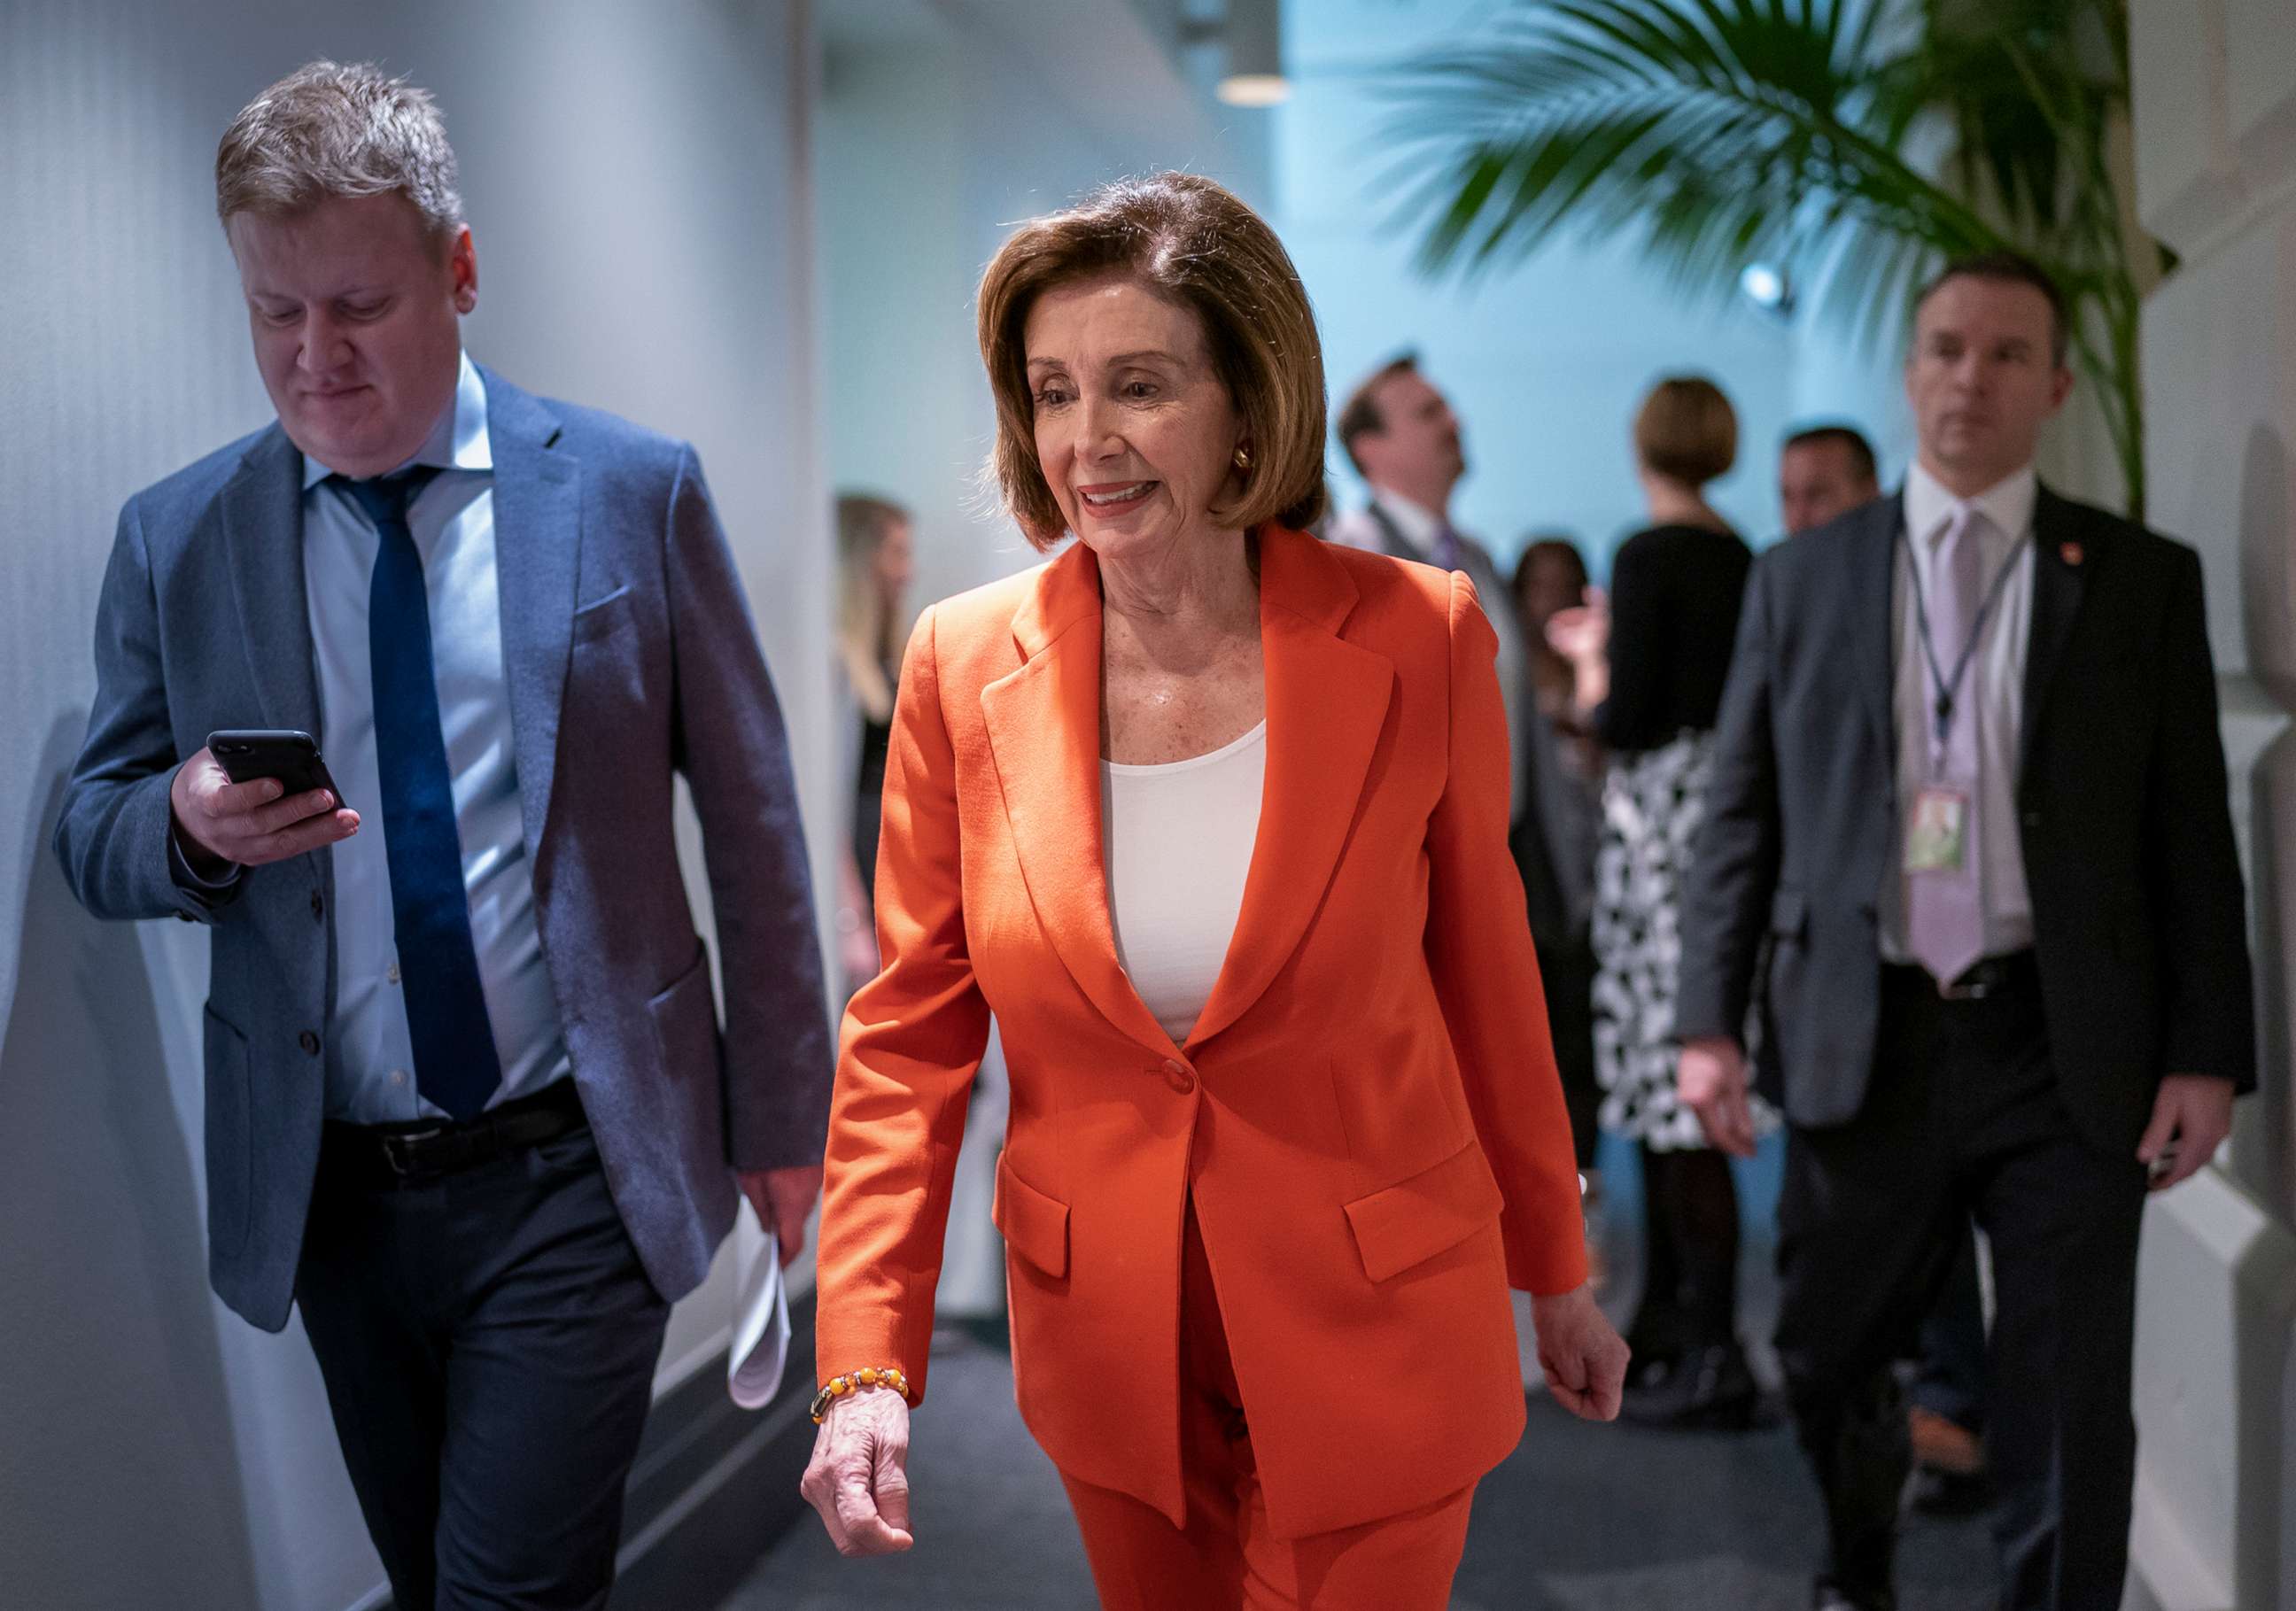 PHOTO: Speaker of the House Nancy Pelosi arrives for a meeting with fellow Democrats on Capitol Hill in Washington, D.C., Feb. 26, 2020.